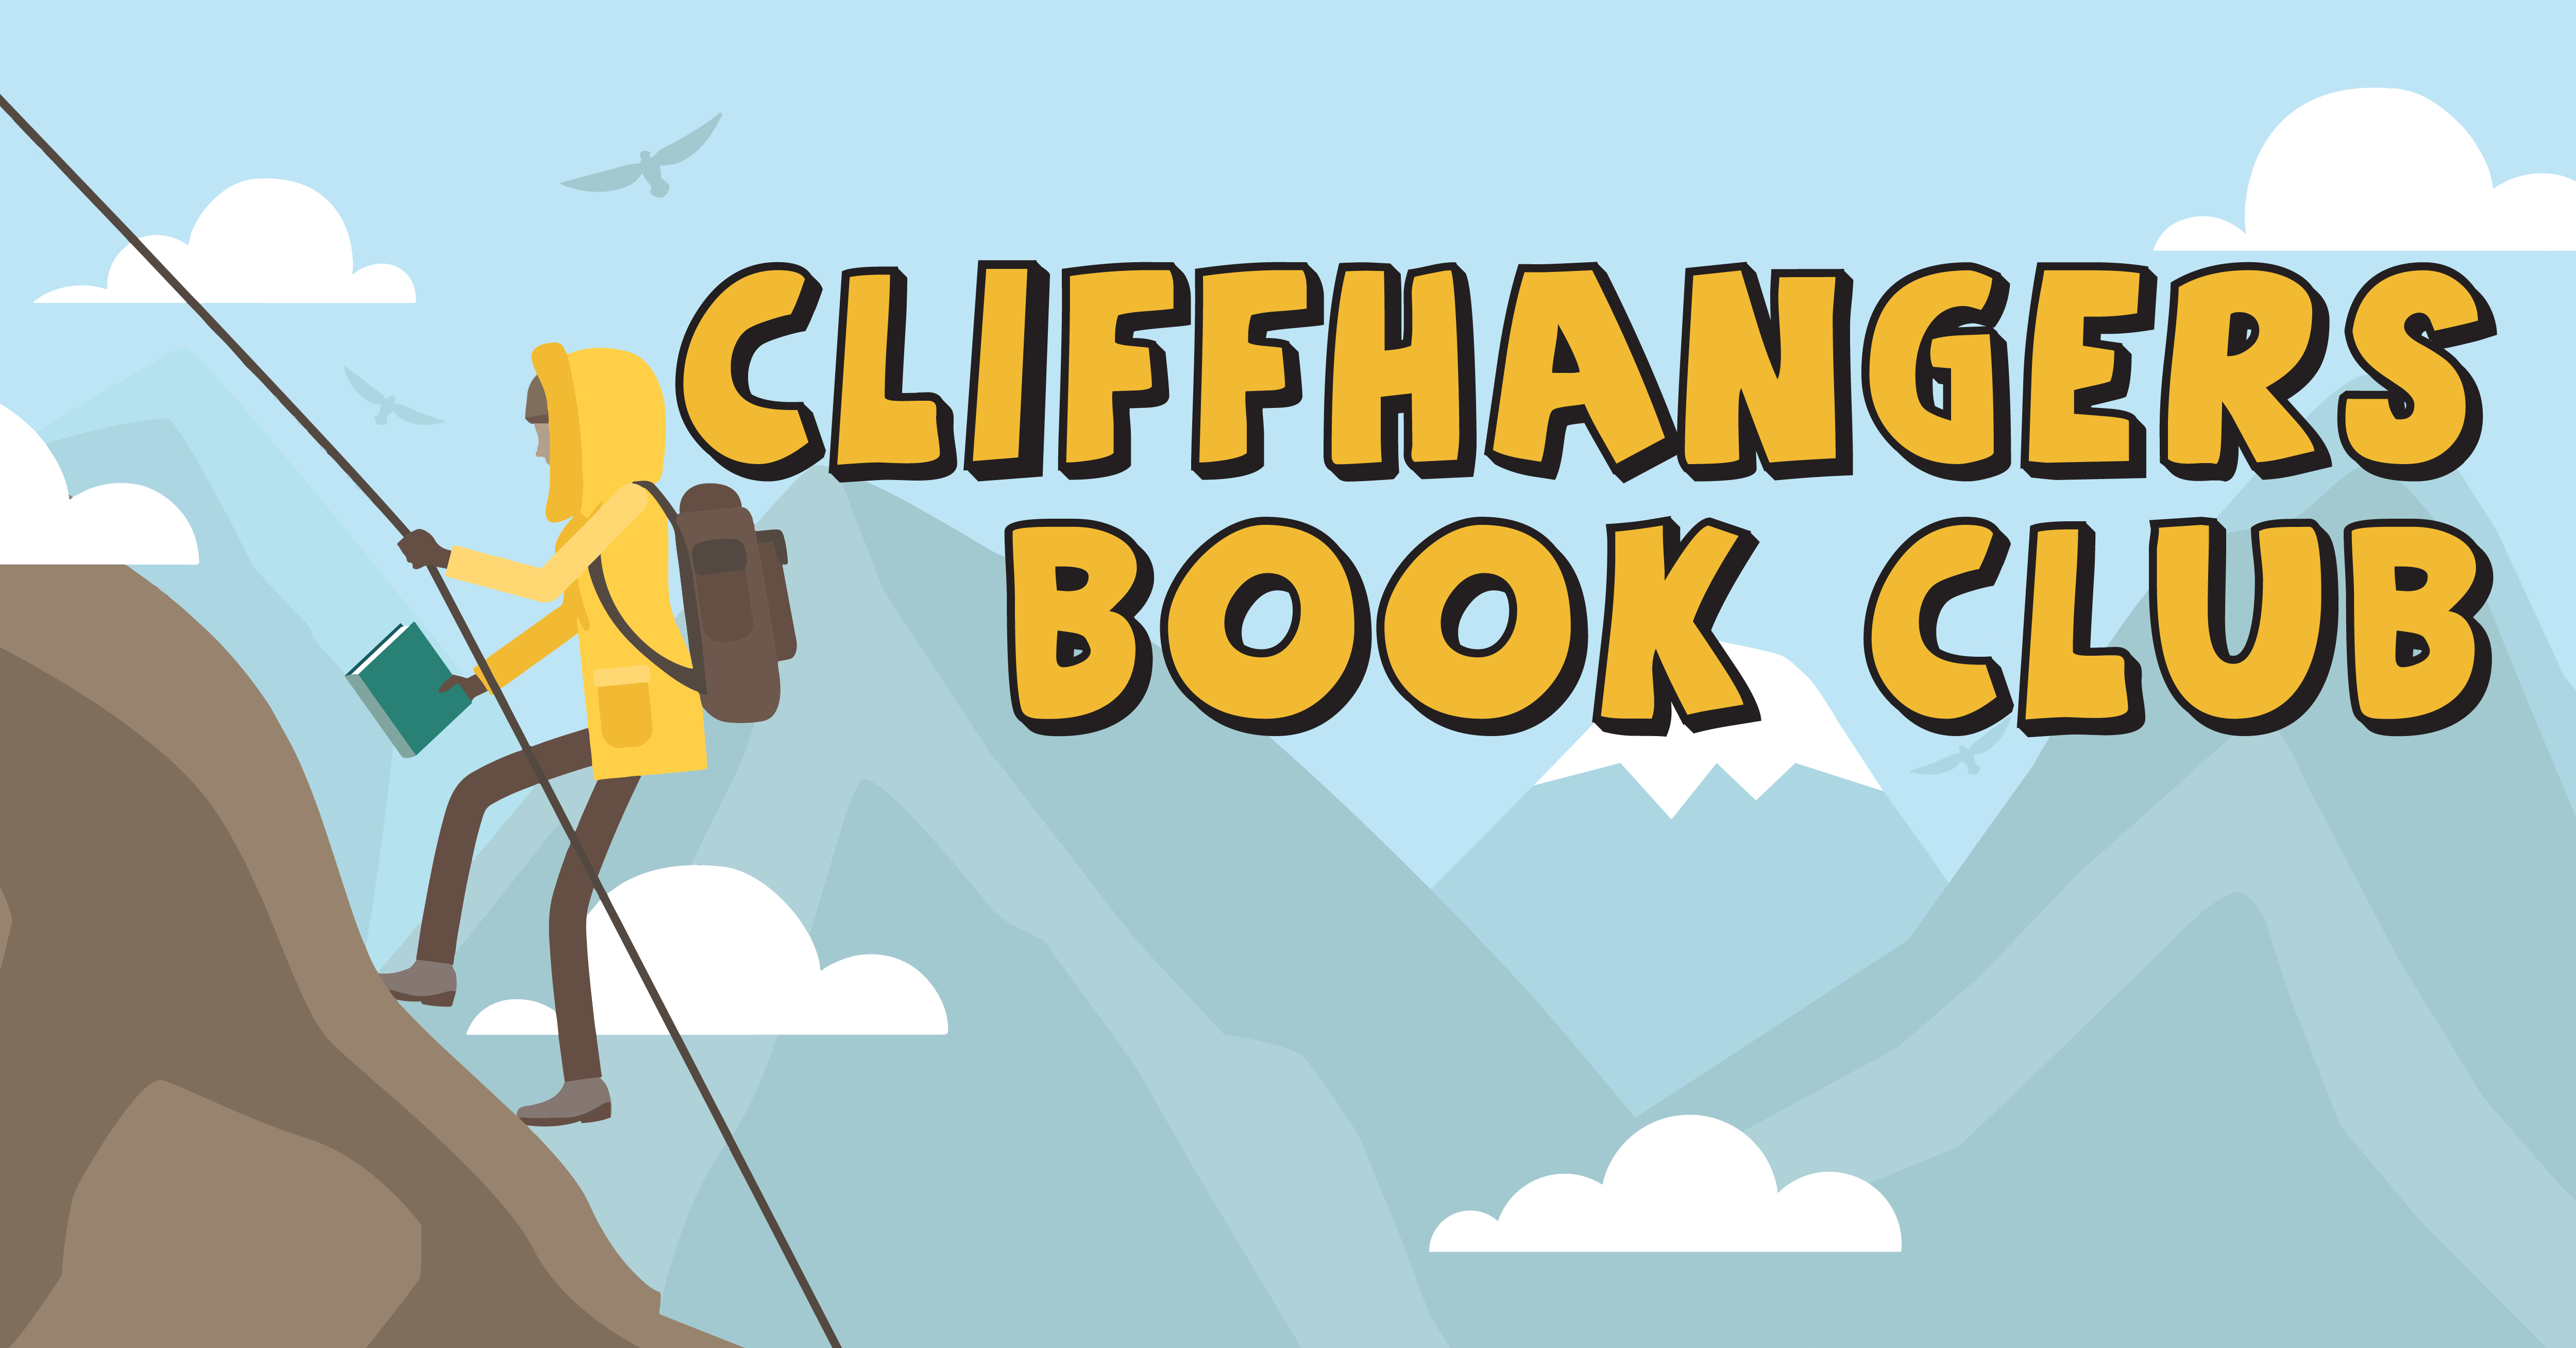 Person climbing a mountain with a book in their hand, and text that says "Cliffhangers Book Club"